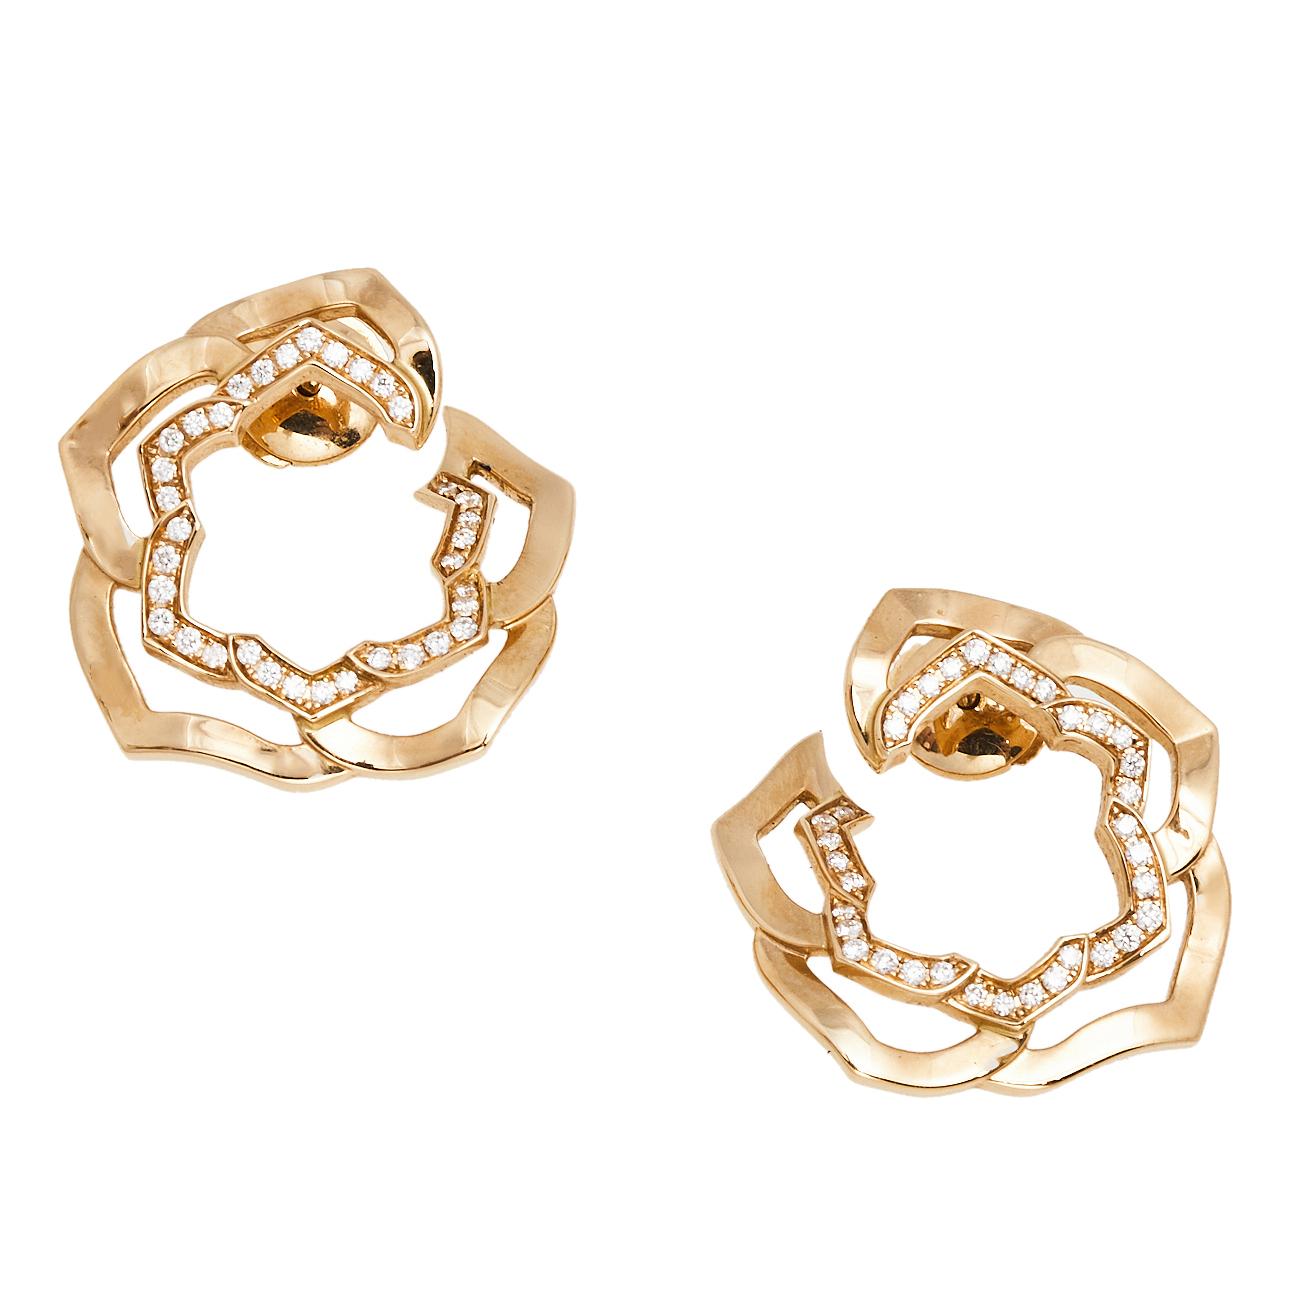 Reflecting Piaget’s exquisite craftsmanship, this pair of 18k rose gold earrings are designed as rose motifs. They are intricately designed with diamond embellishments. Screw fastenings let these beauties sit safely on your ears.

Includes: Original